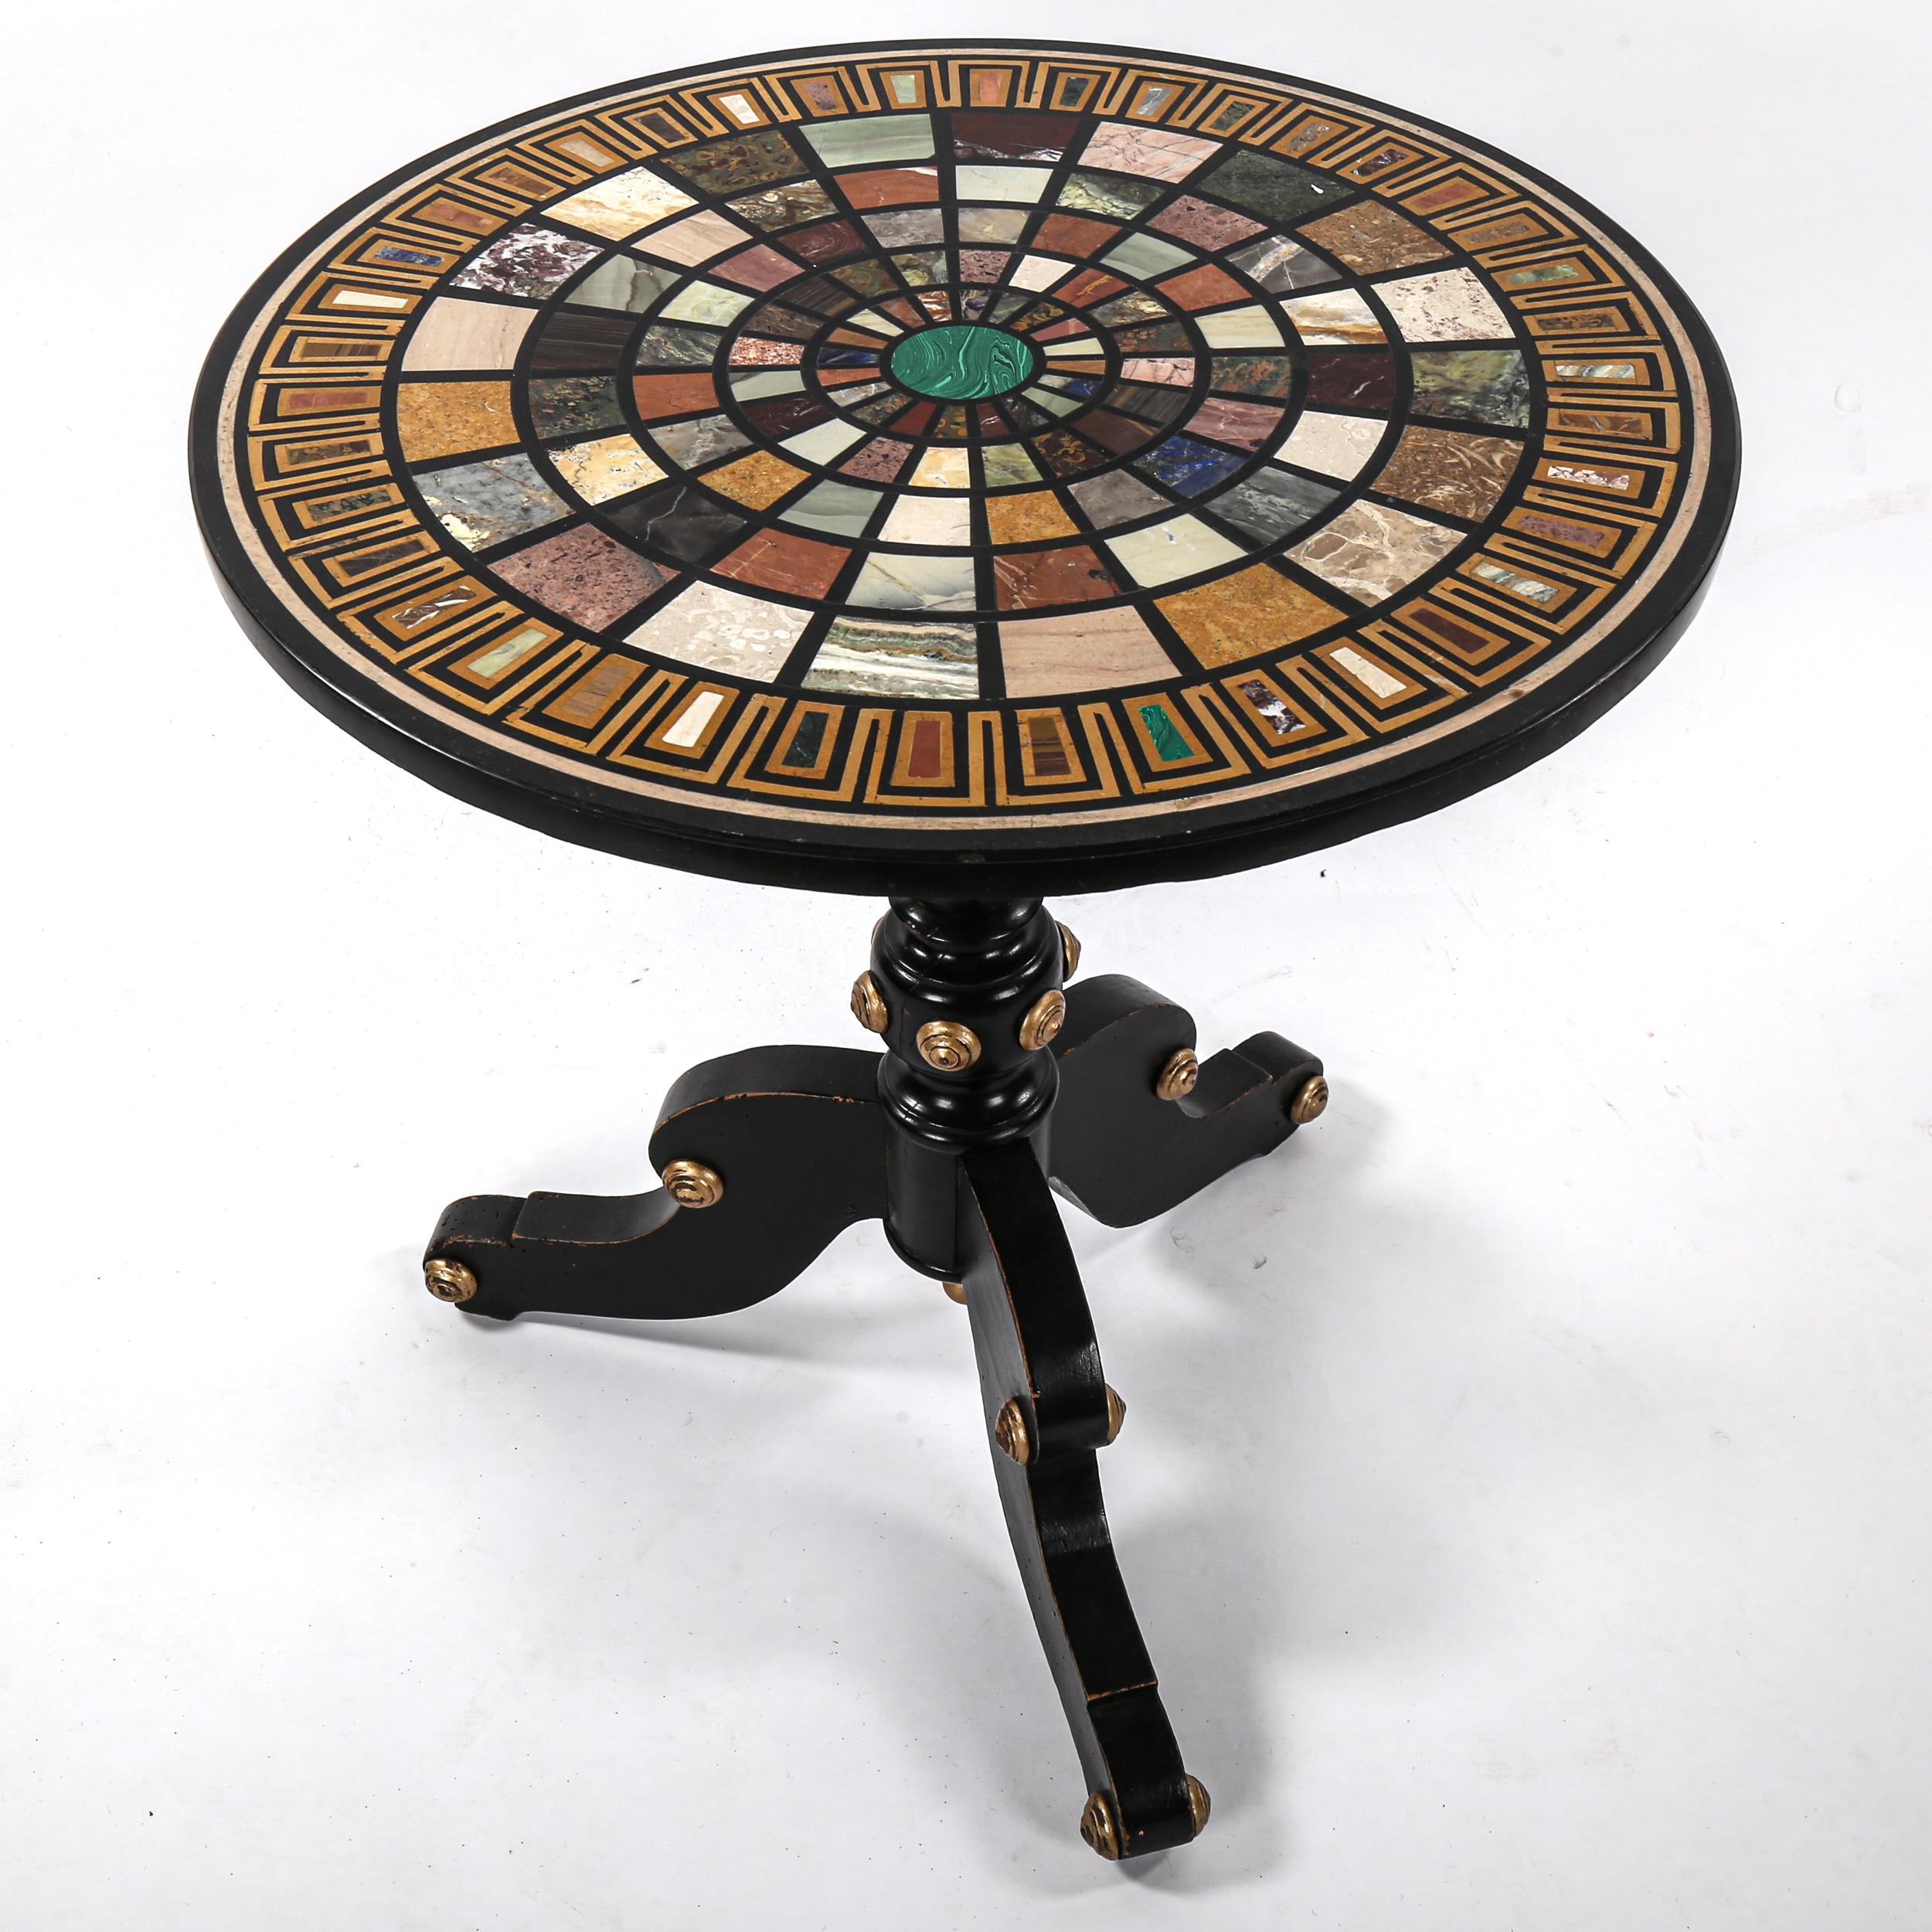 An Italian Pietra Dura specimen hardstone-topped circular centre table, on gilded and ebonised